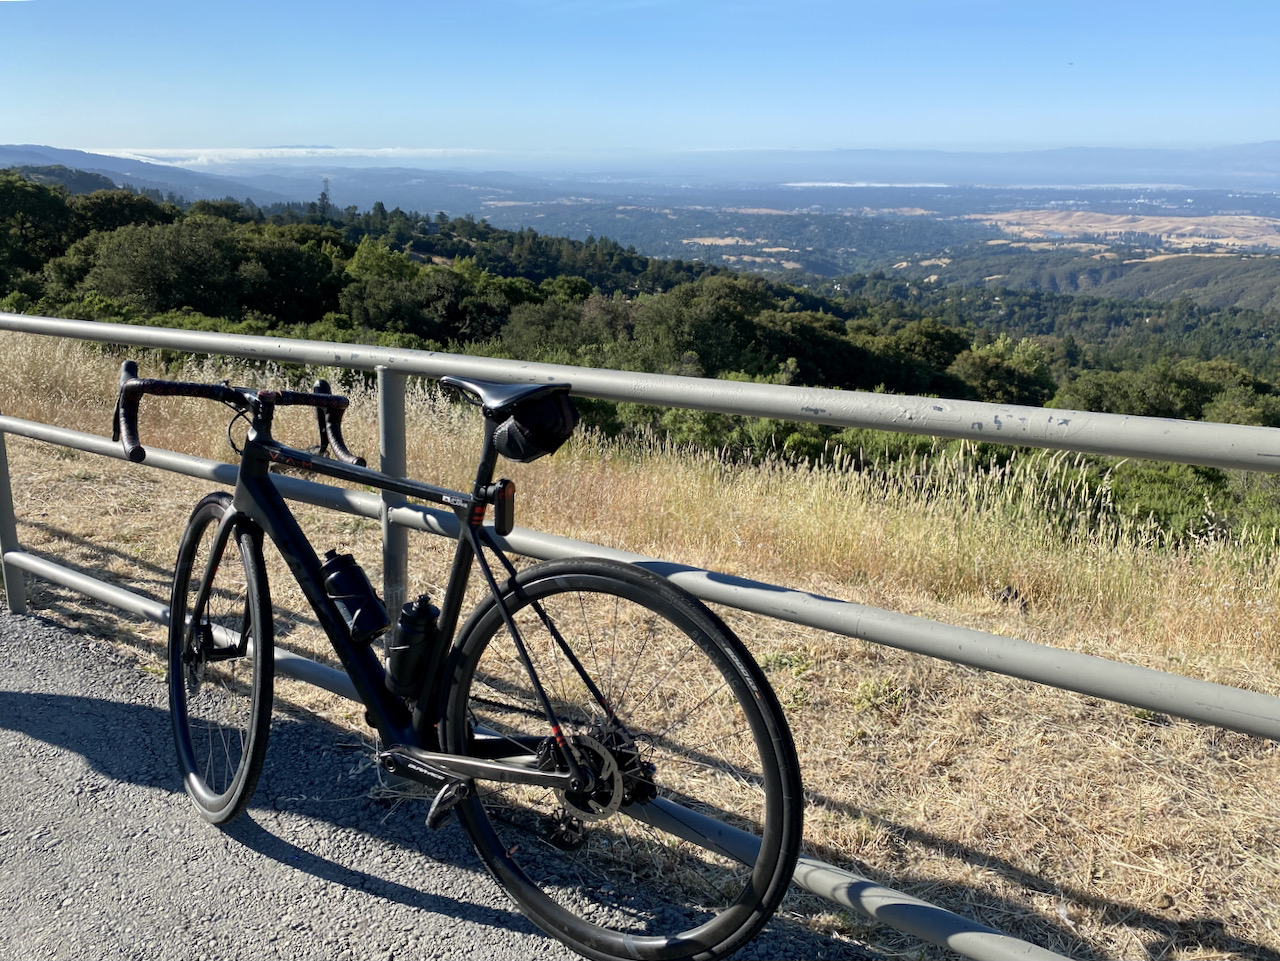 Factor O2 VAM bike at viewpoint along Skyline Drive in the Bay Area, California